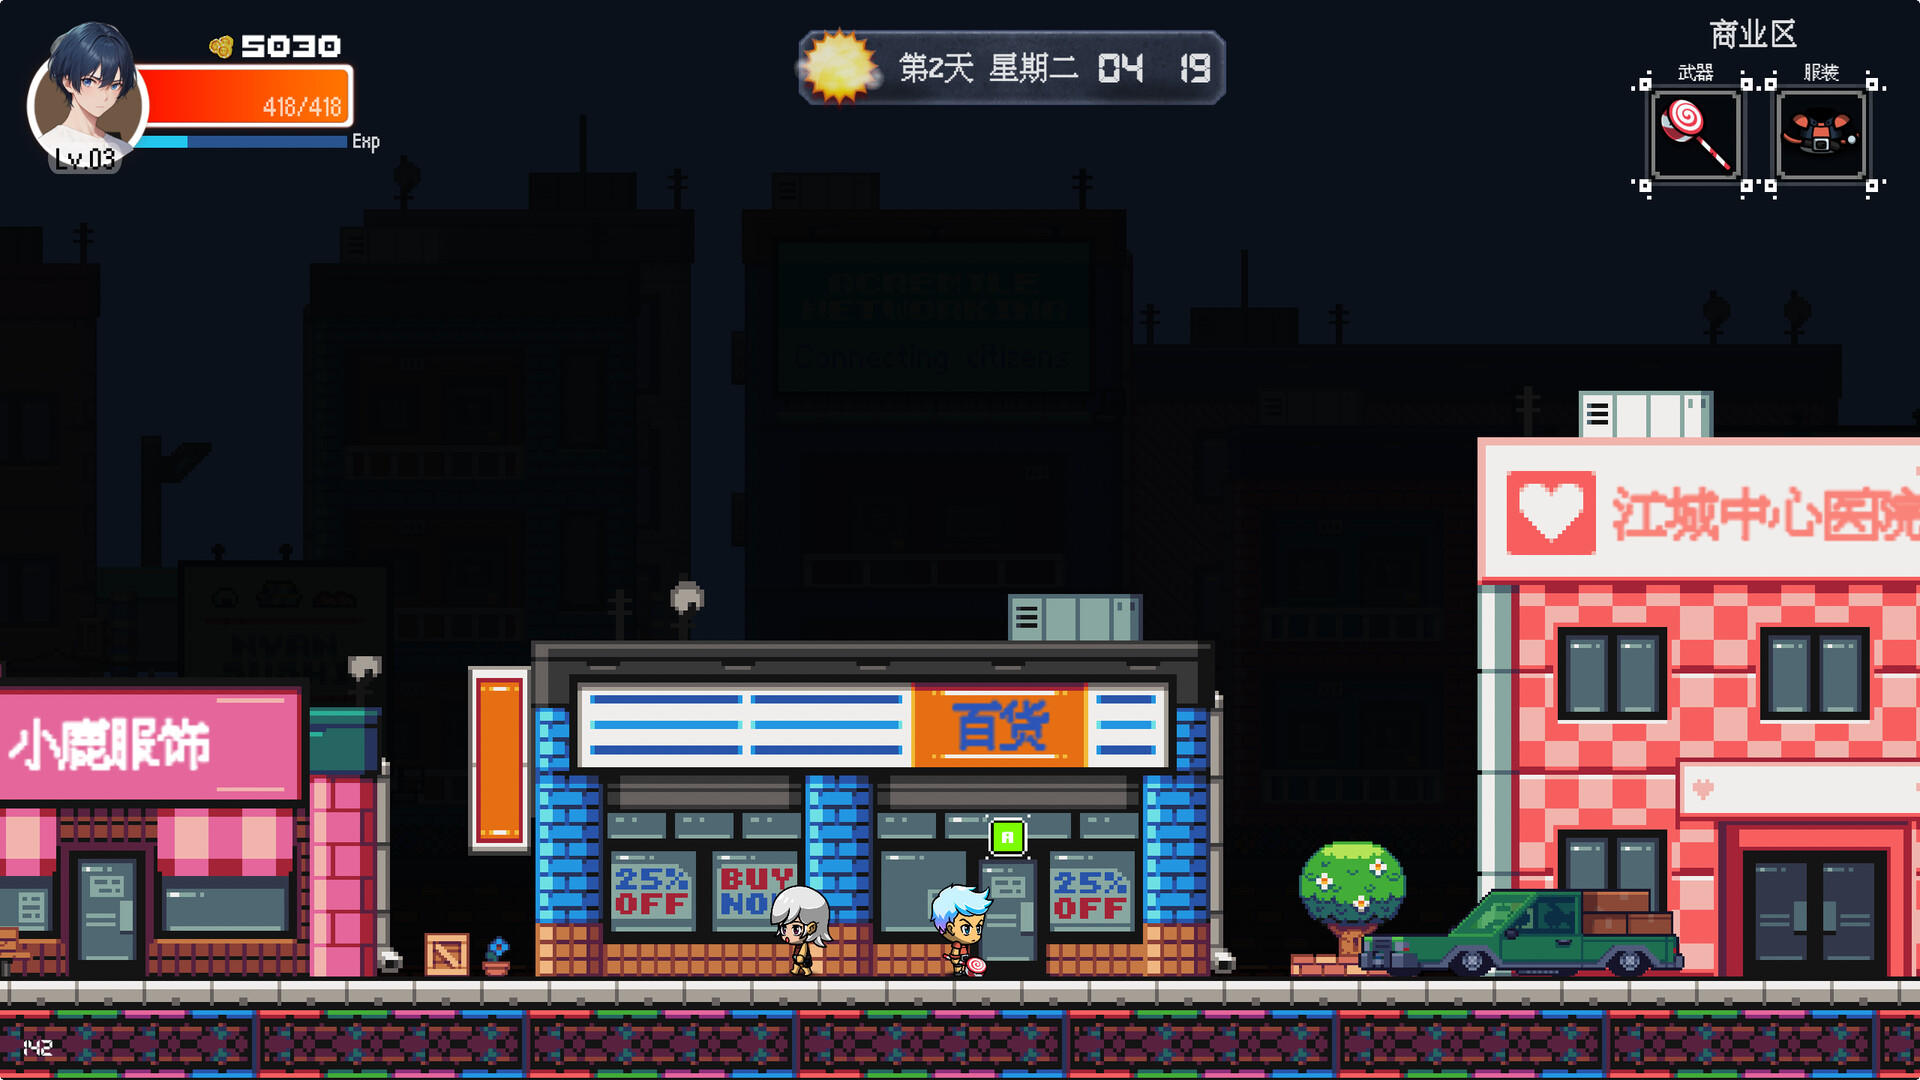 Shelter in the Doomsday screenshot game